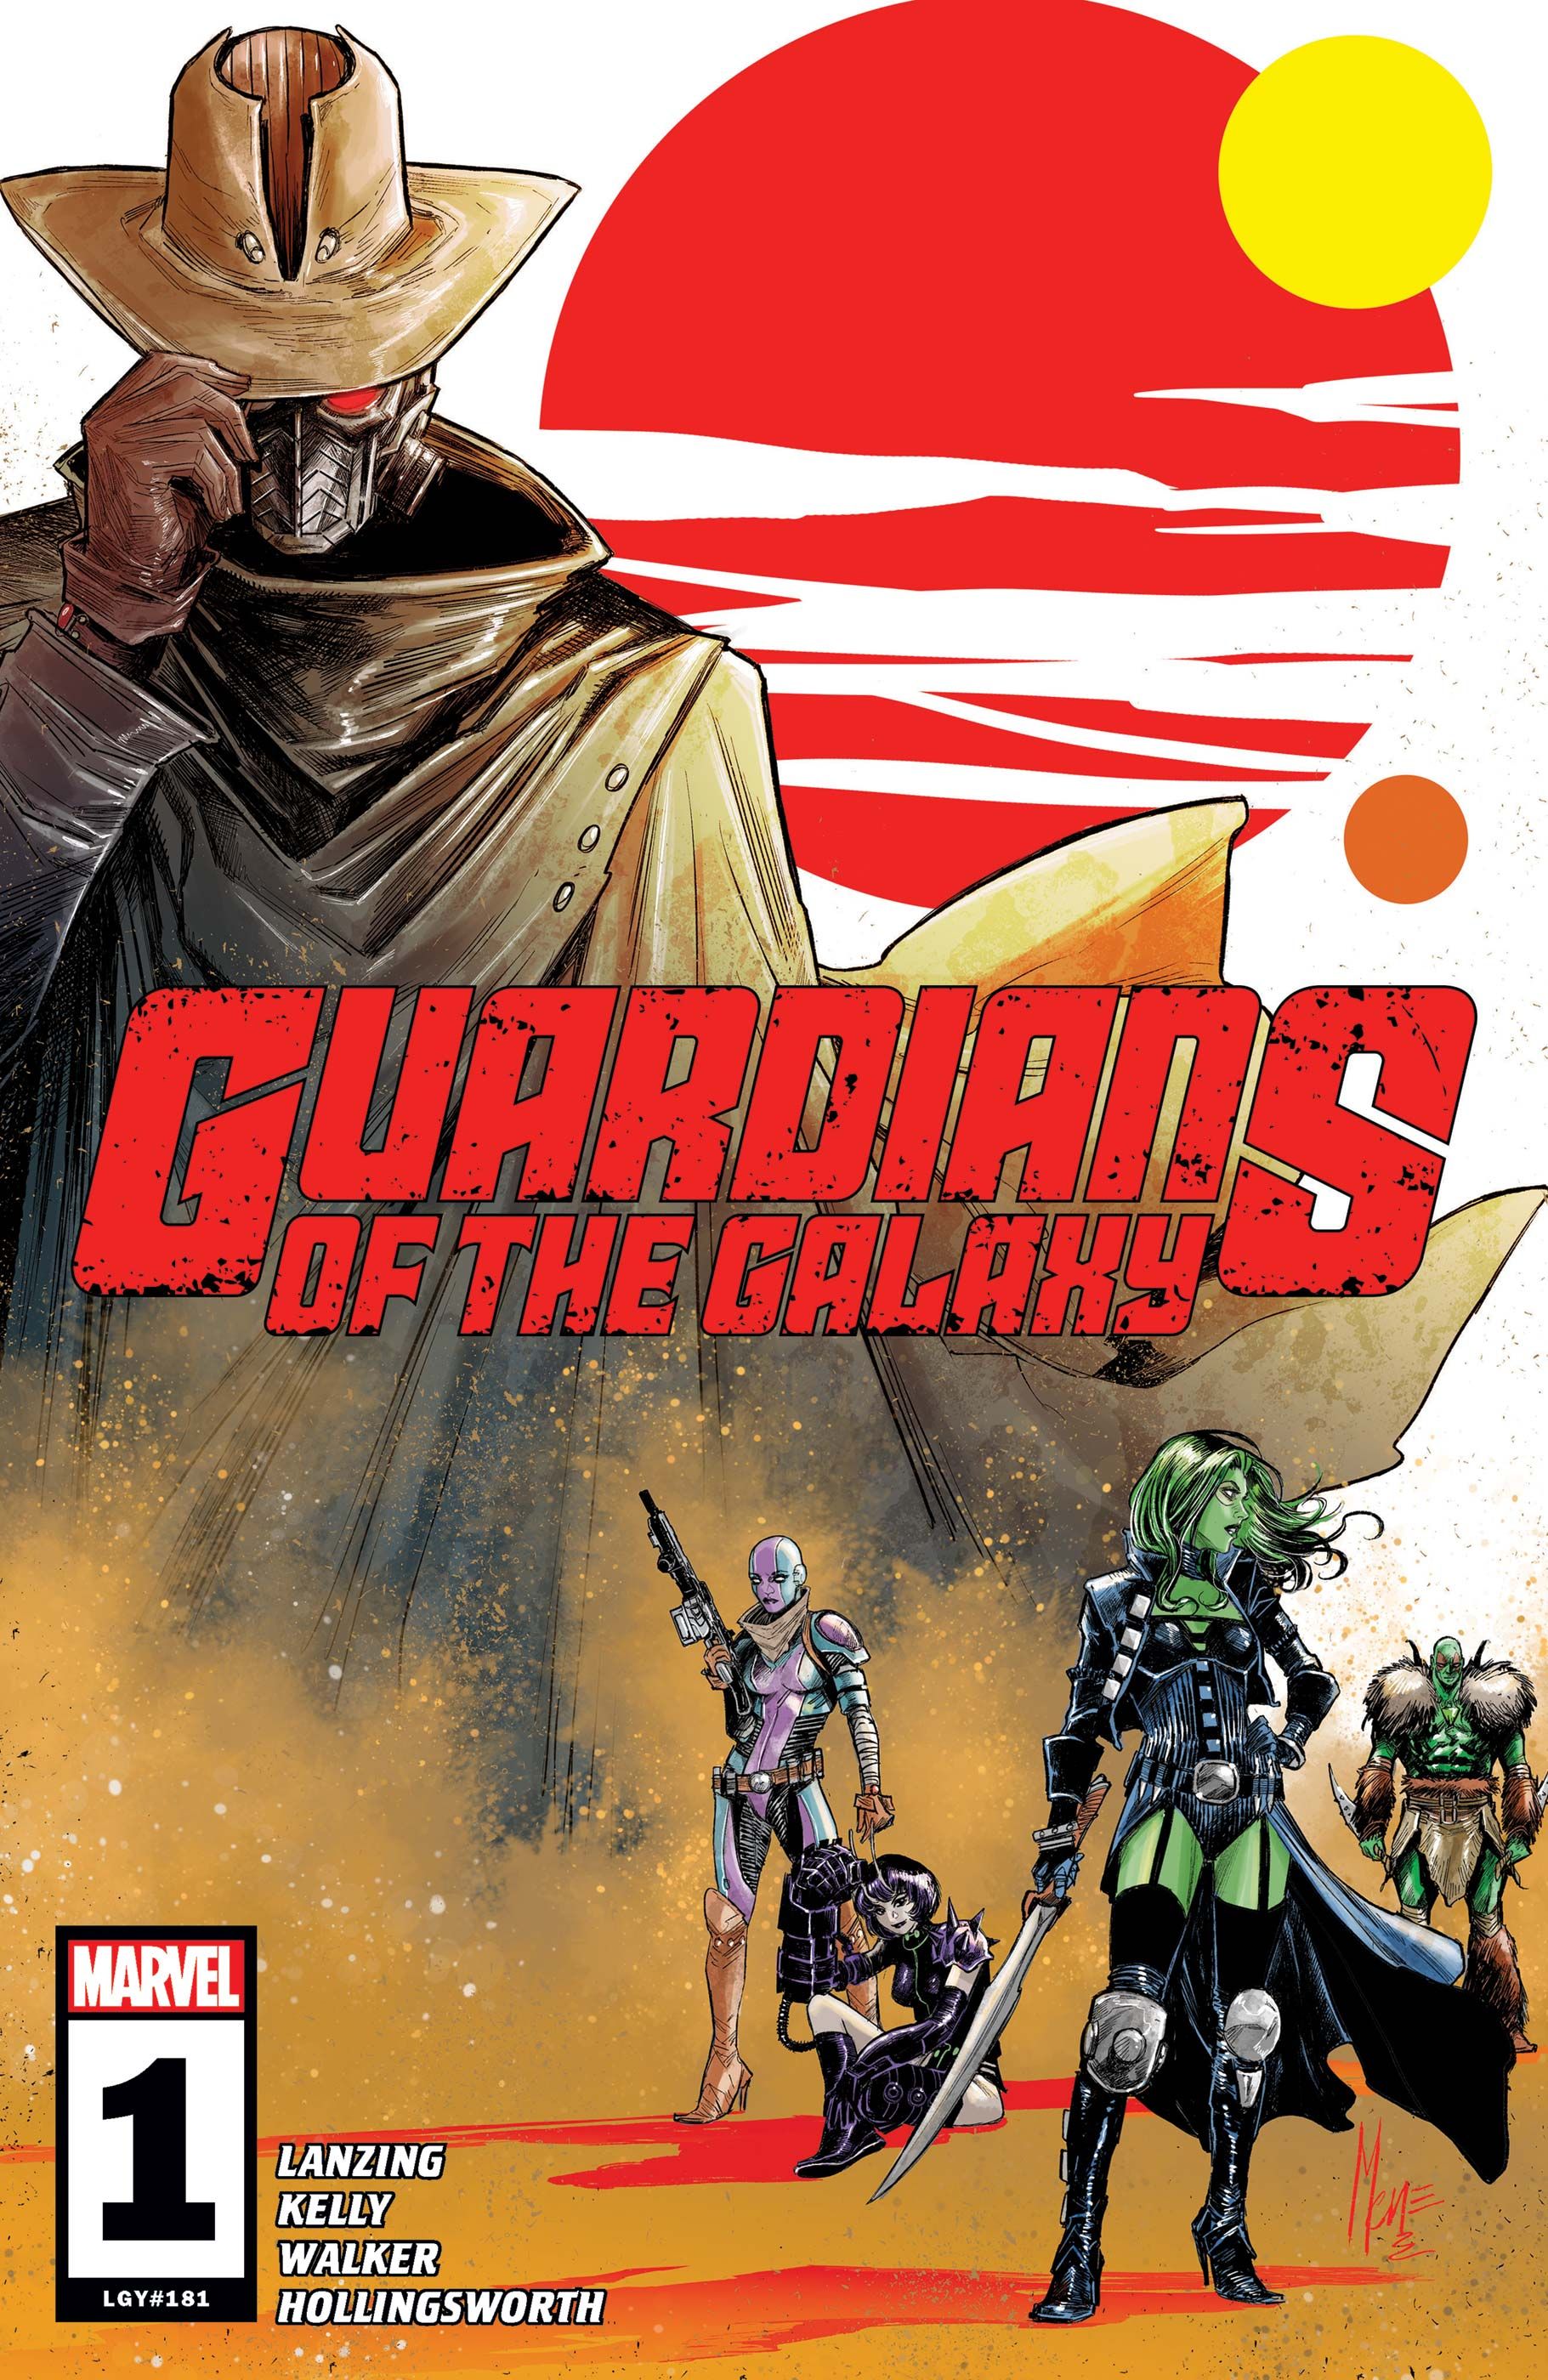 Guardians of the Galaxy #1 cover Featuring Gamora, Star Lord, and Nebula